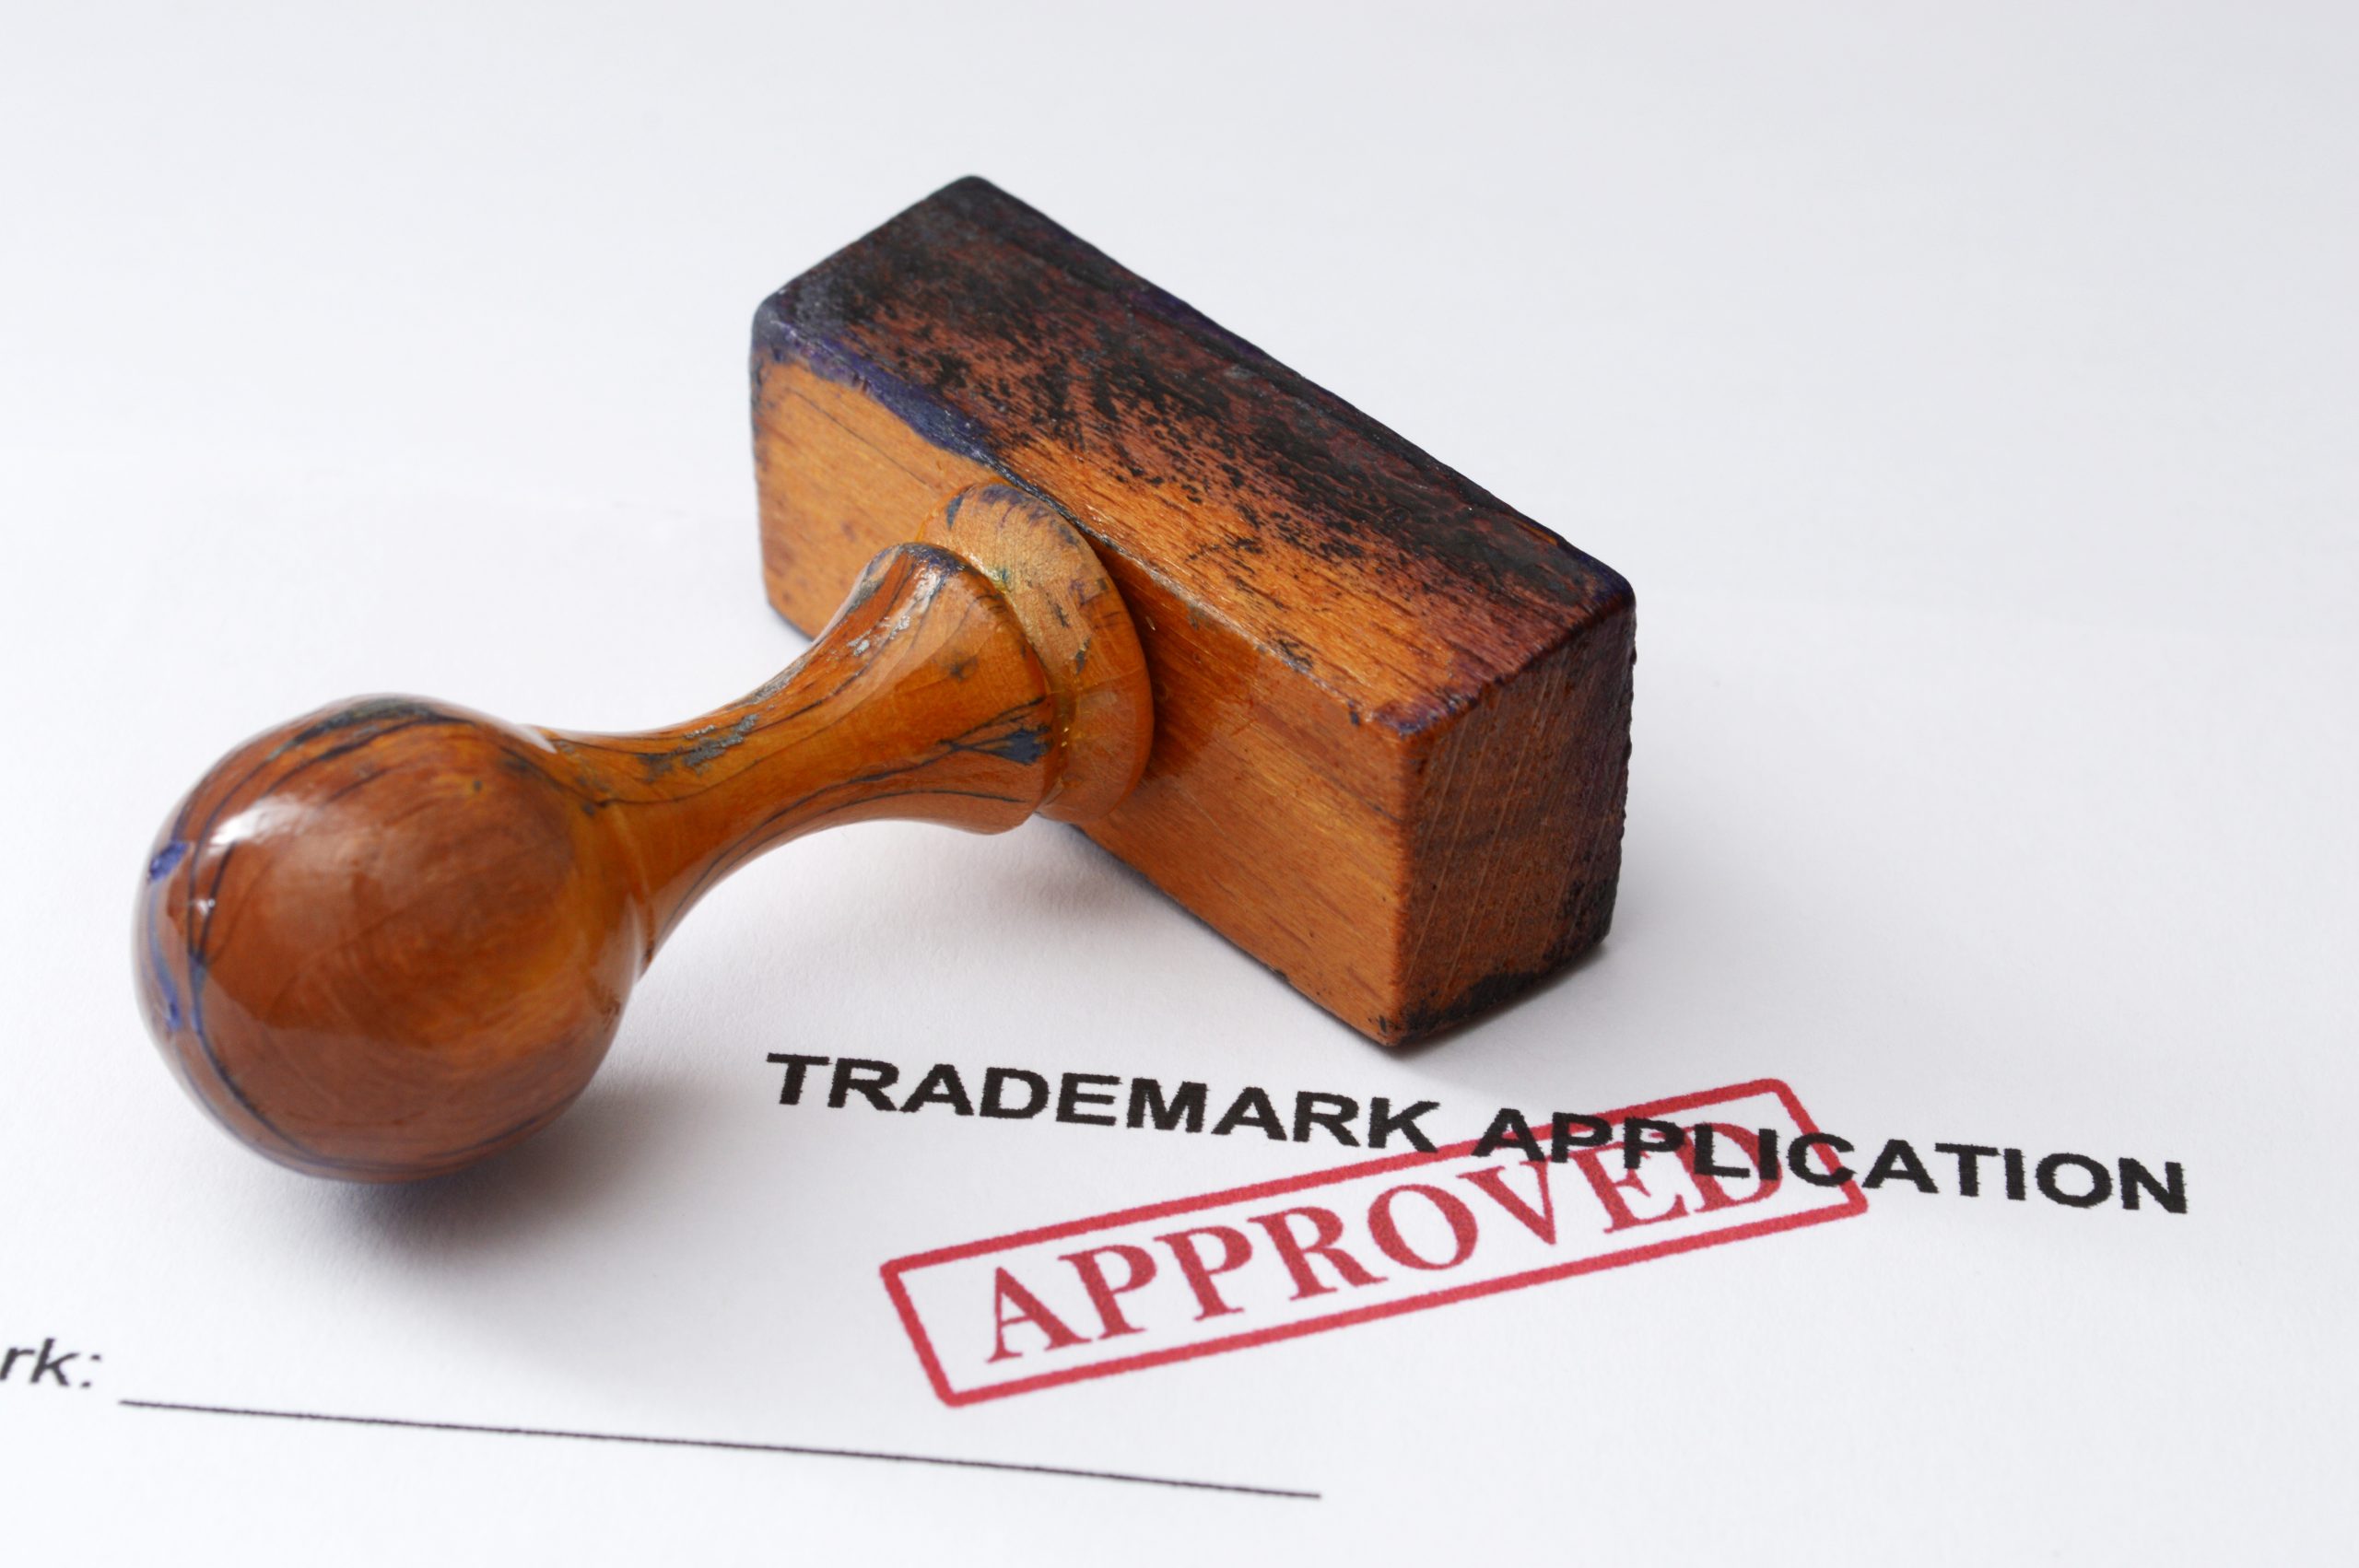 Steps to follow for the registration of trademarks in Panama